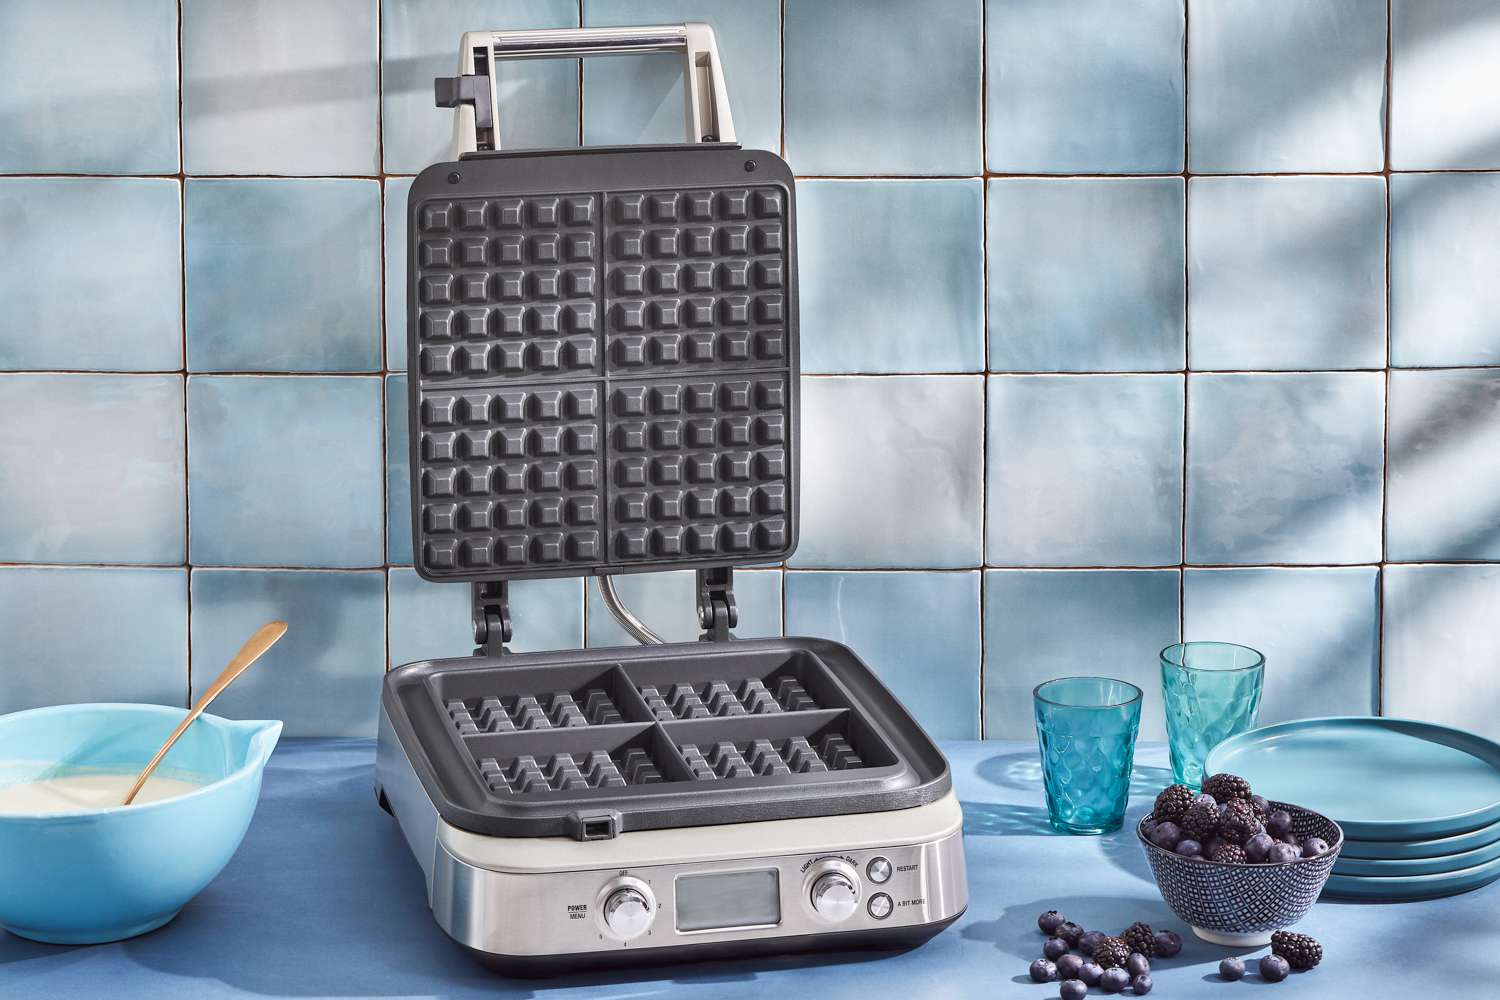 What Waffle Iron Does Al Roker Use?